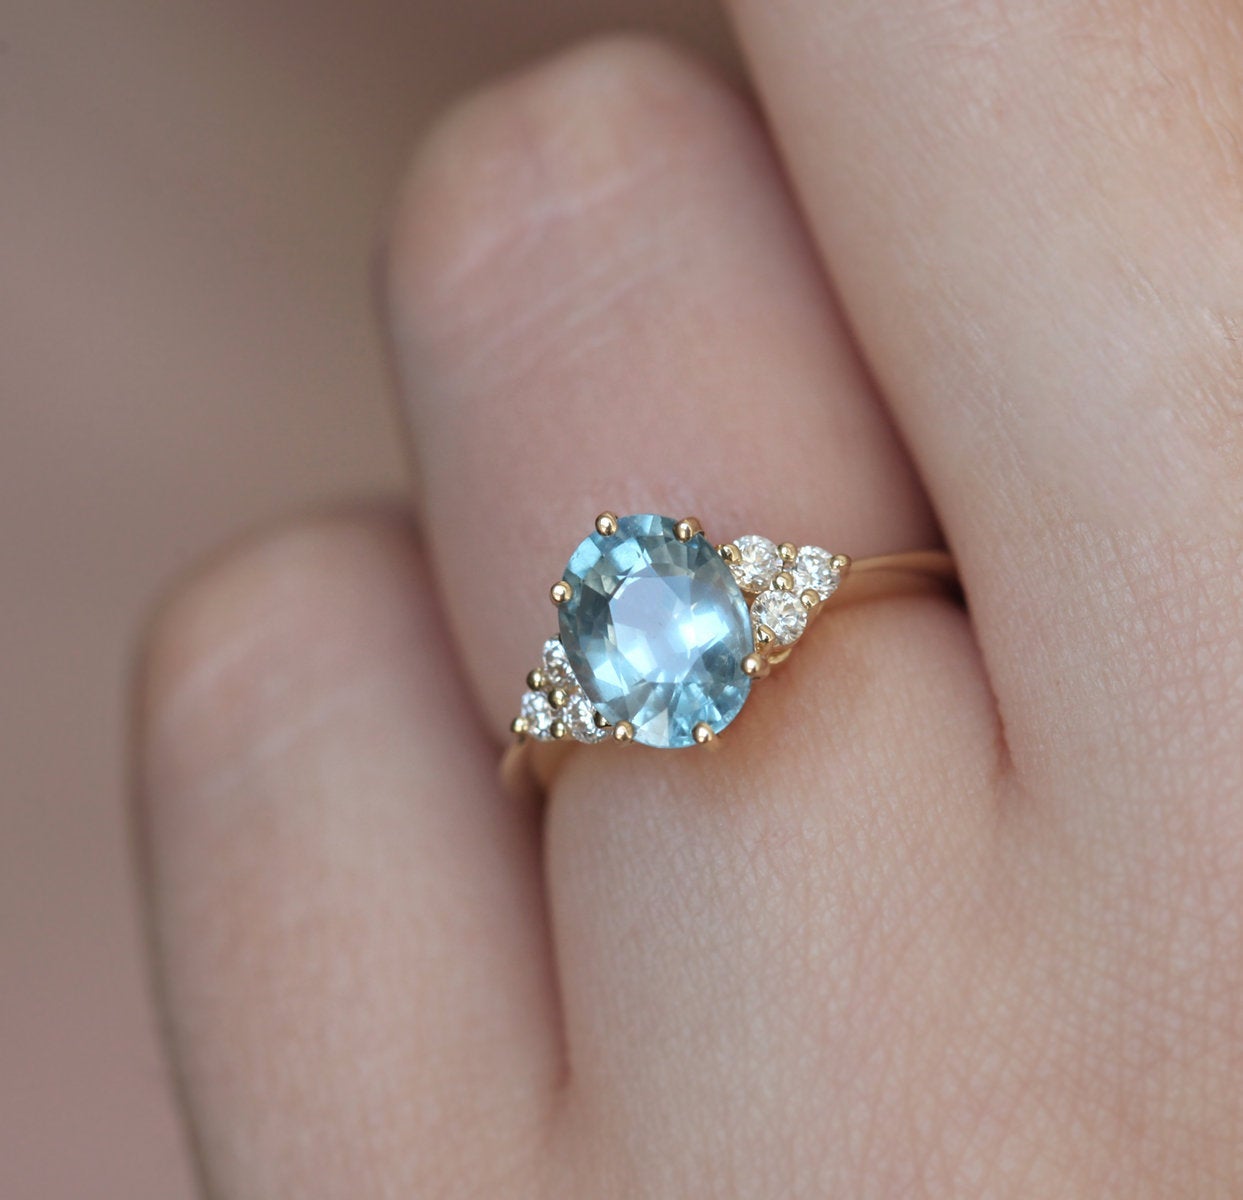 Light blue oval-shaped sapphire ring with diamond nesting